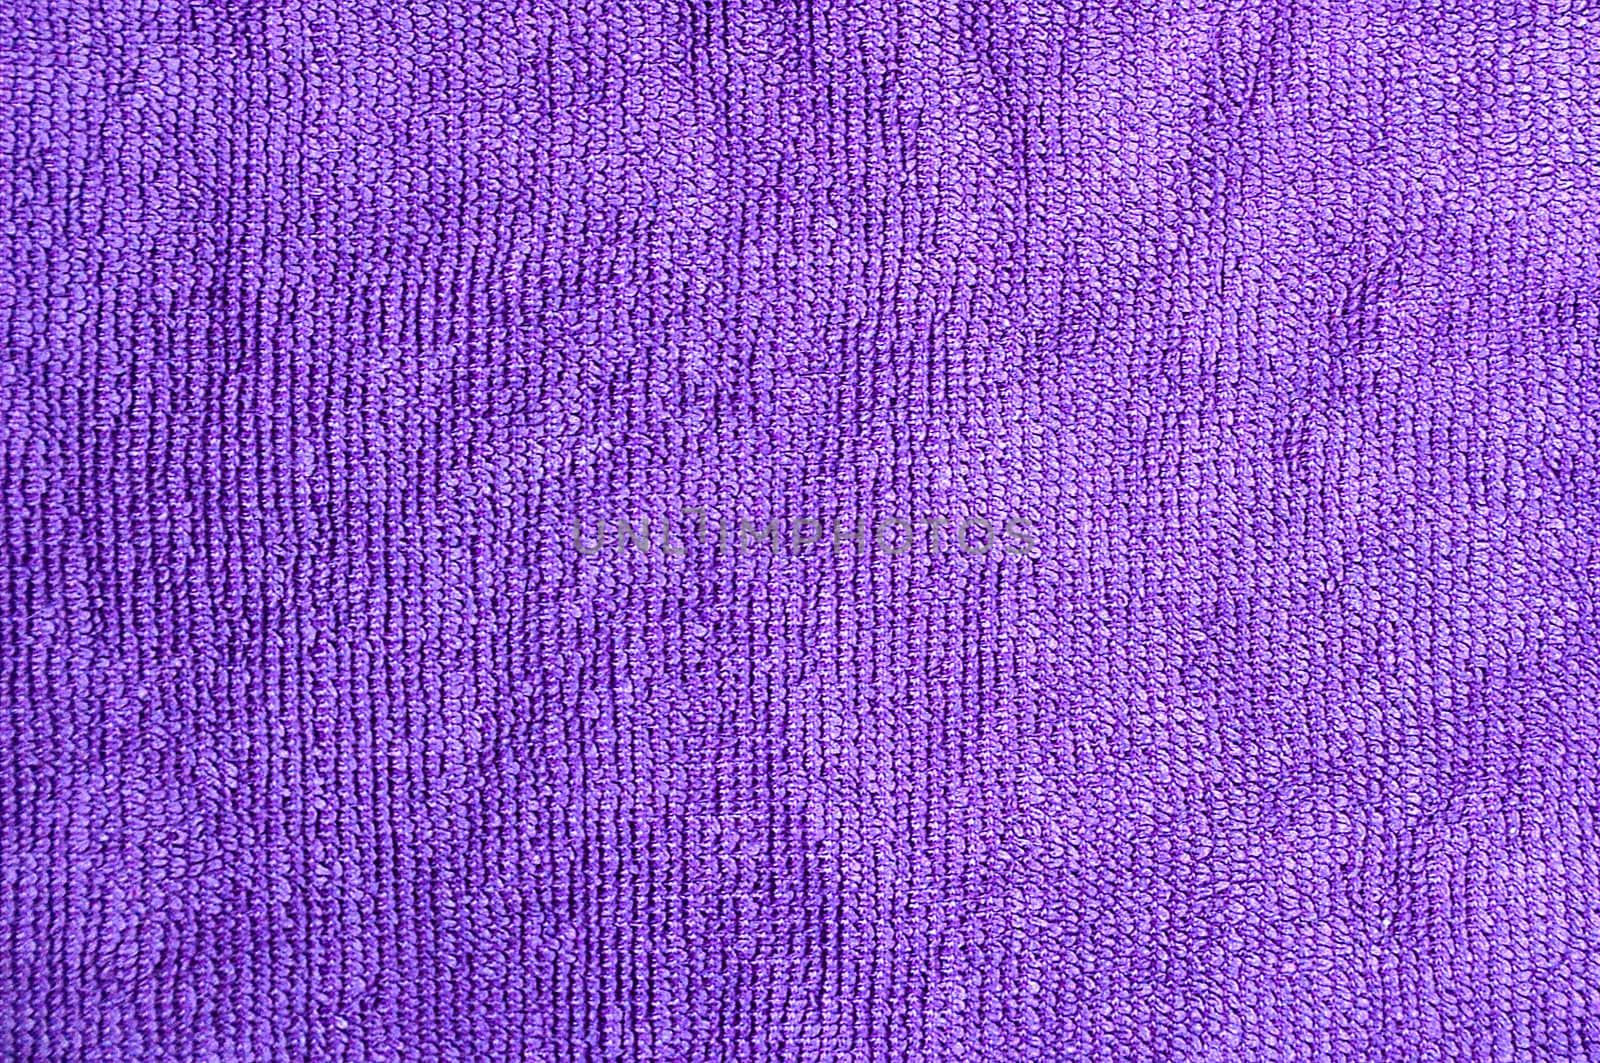 lilac towel texture by AlessandraSuppo